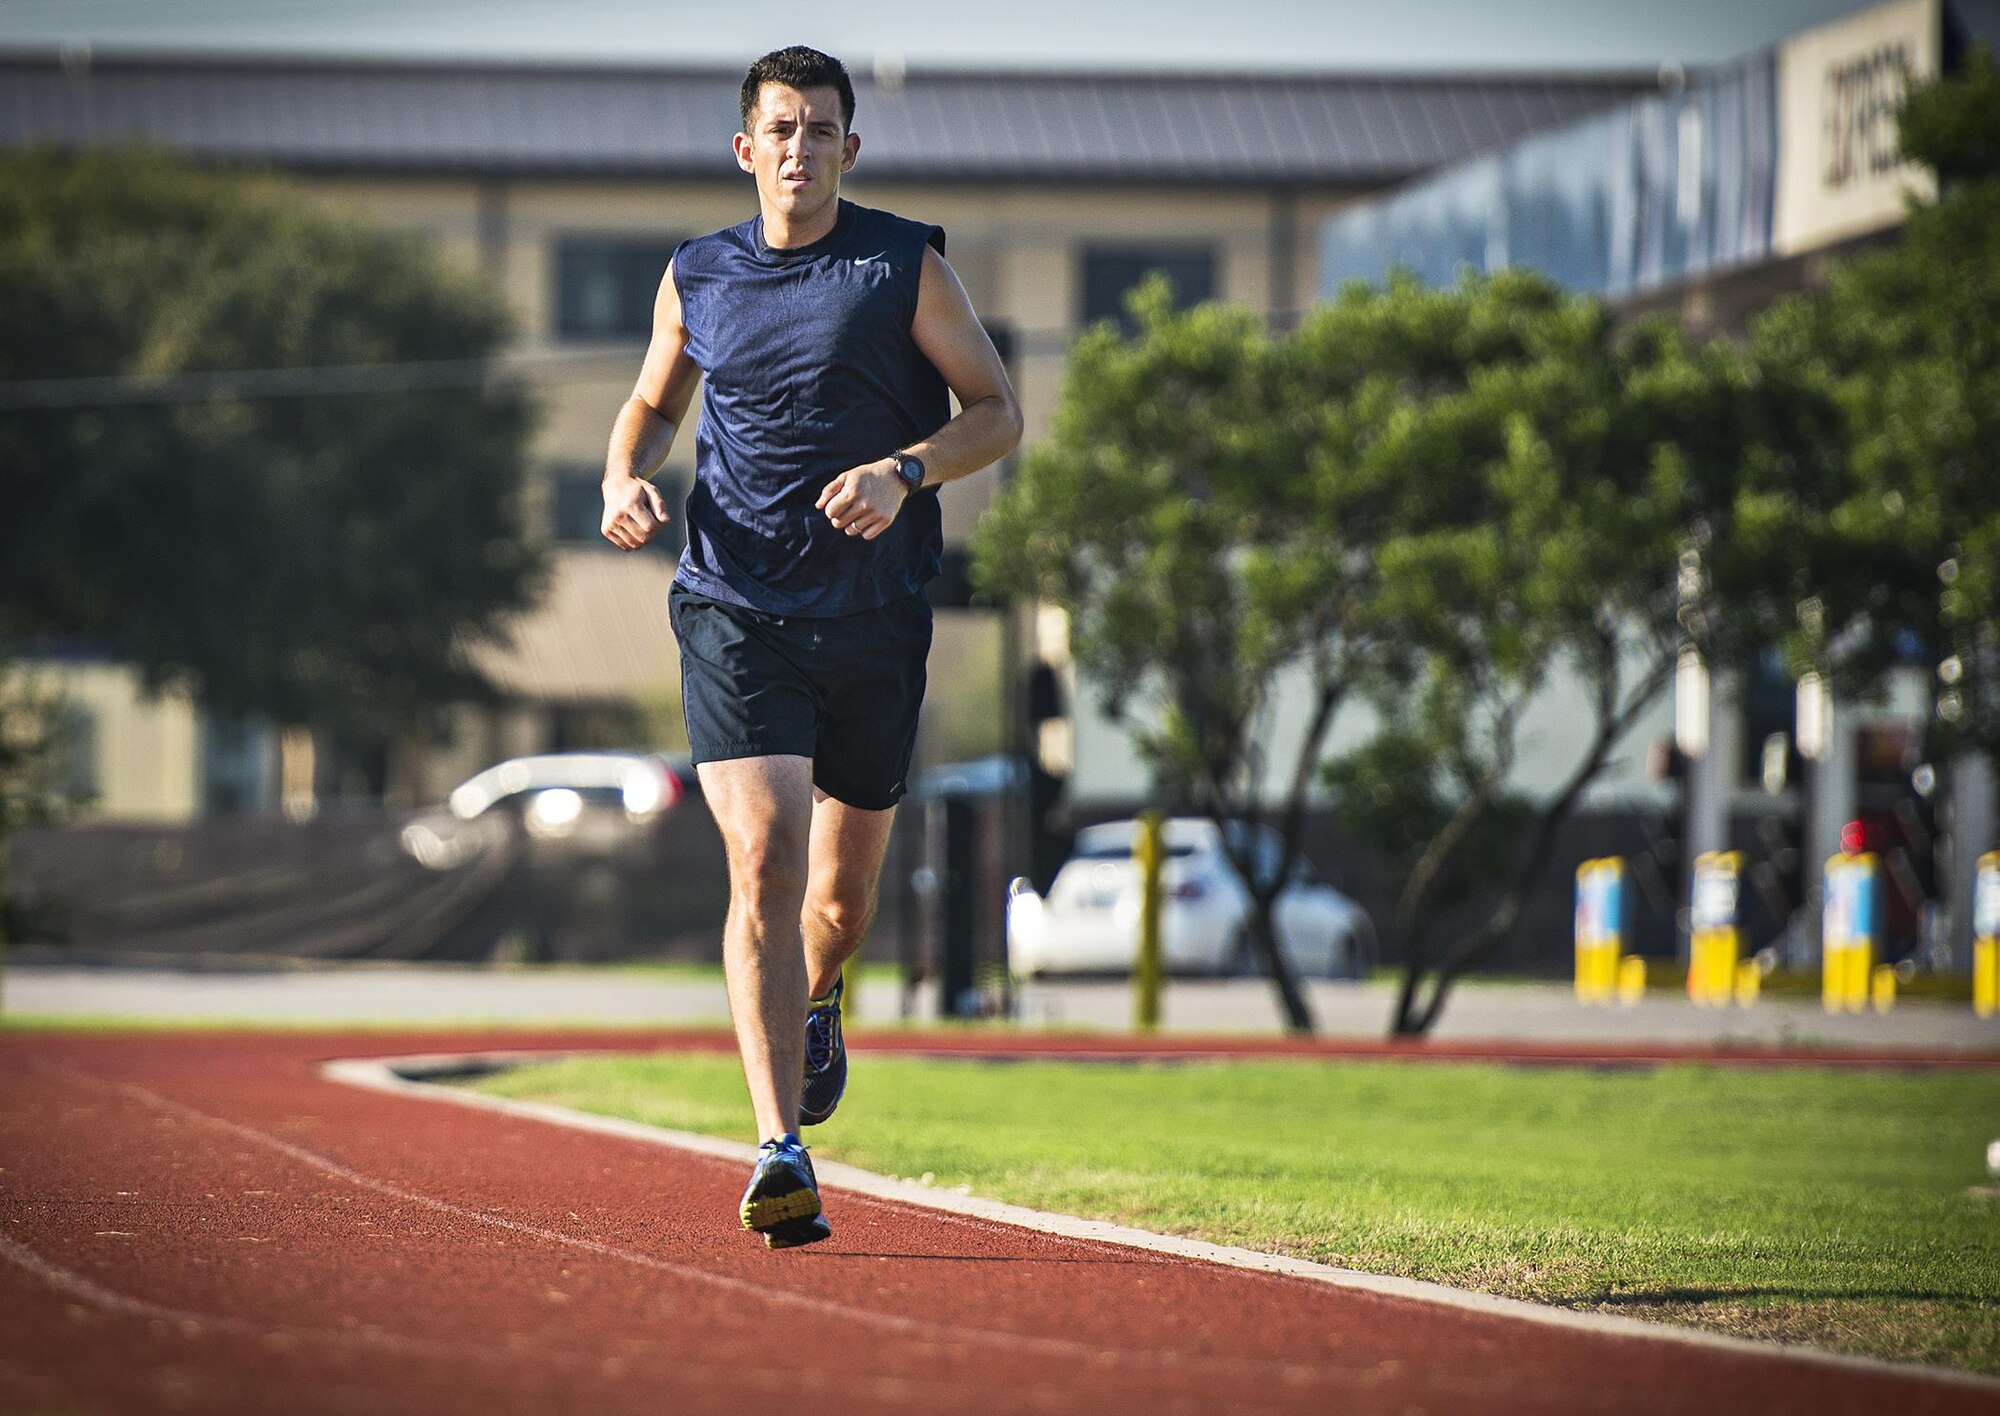 Master Sgt. Tito Carrillo, 433rd Aeromedical Evacuation Squadron flight medic, paces himself as he begins a two-mile speed run Sept. 1, 2016 at Joint Base San Antonio-Lackland, Texas. Carrillo was selected to run on the 2016 Air Force Reserve Command's Challenge Team. The team is comprised of ten marathon runners who will compete with other Air Force major commands in the half and full marathon at the 20th annual Air Force Marathon Sept. 17, 2016 at Wright-Patterson Air Force Base, Ohio.  (U.S. Air Force photo by Benjamin Faske)